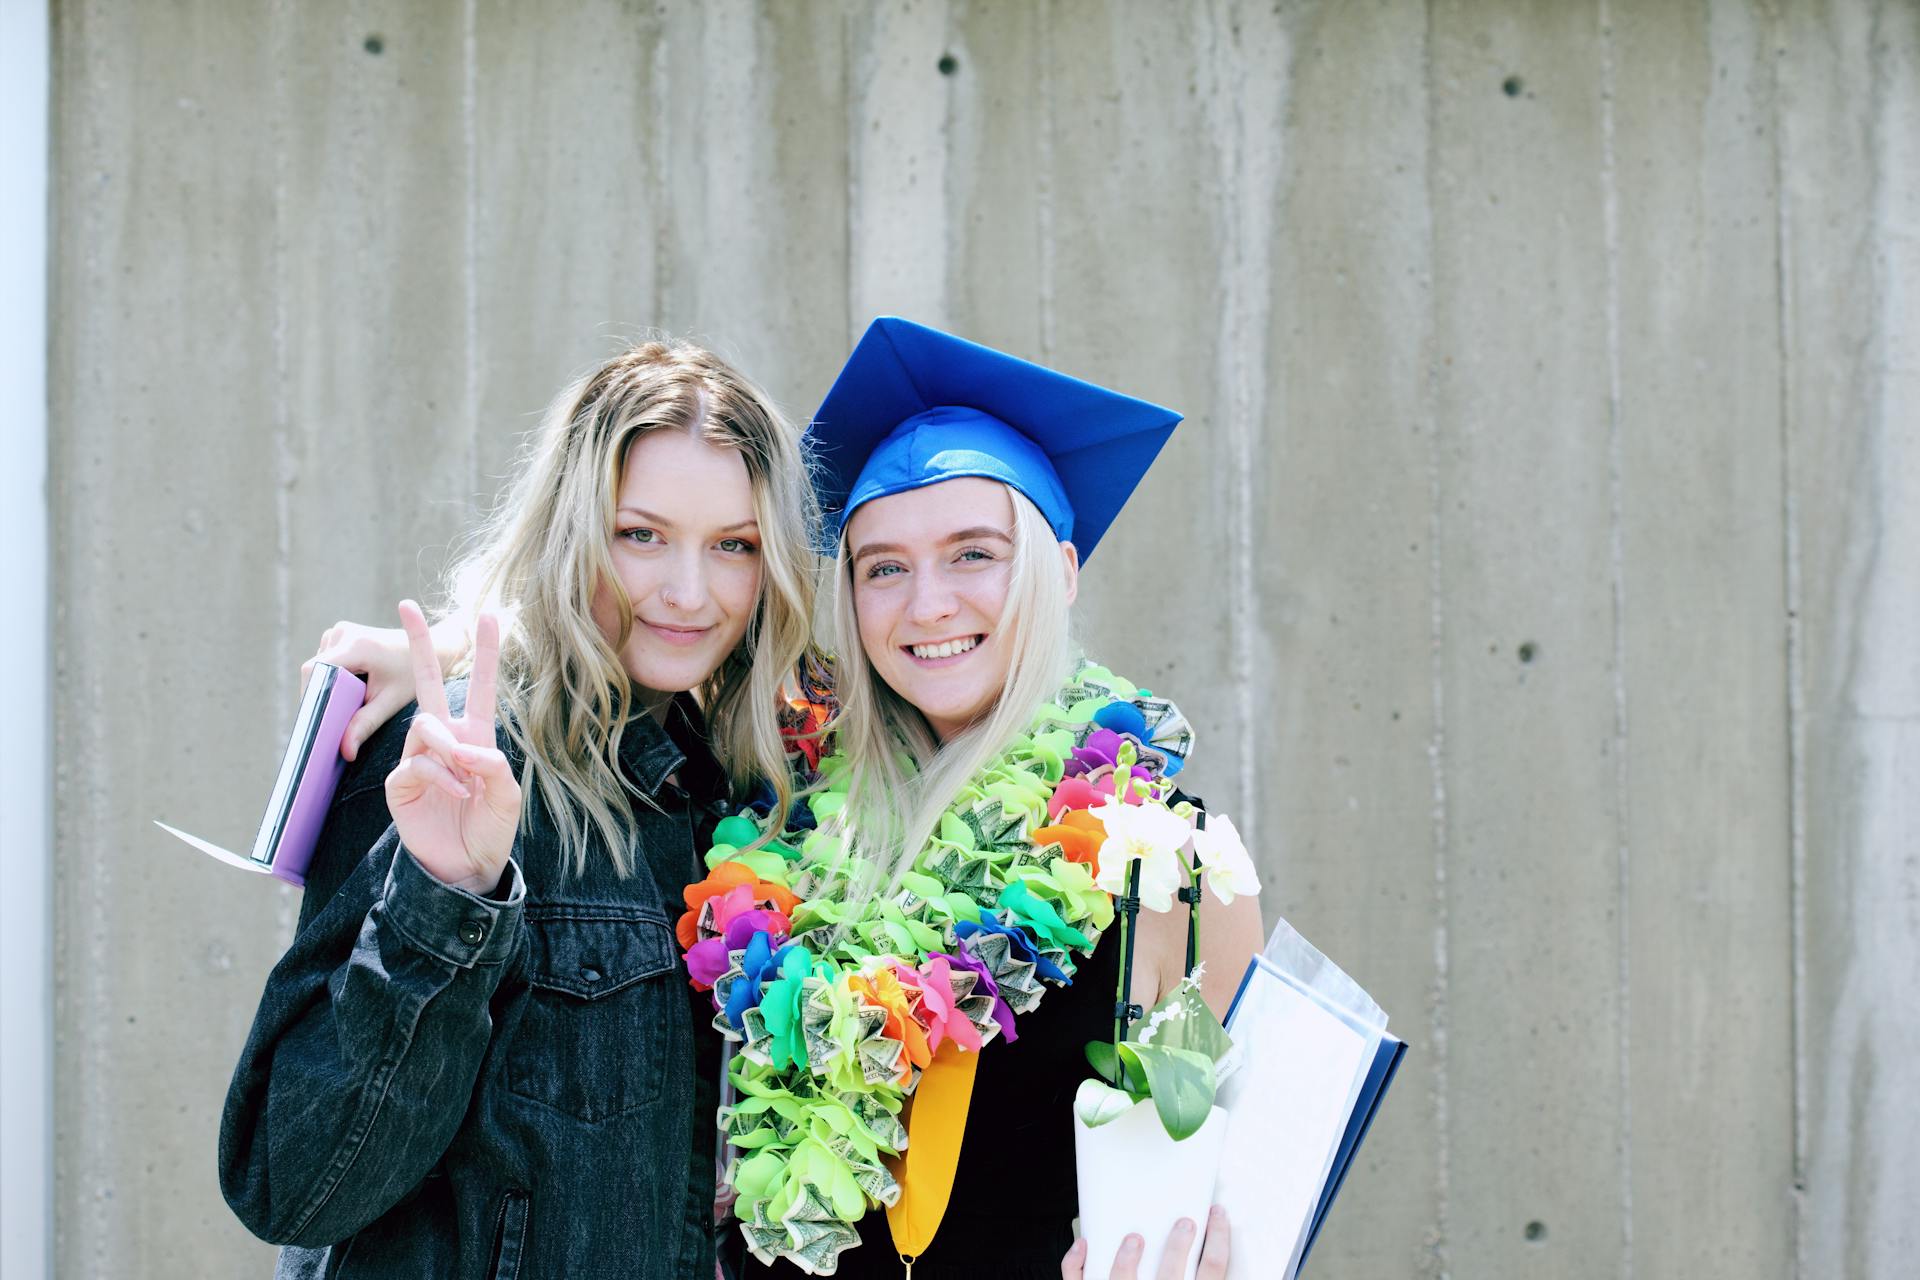 Twin sisters celebrating their graduation | Source: Pexels